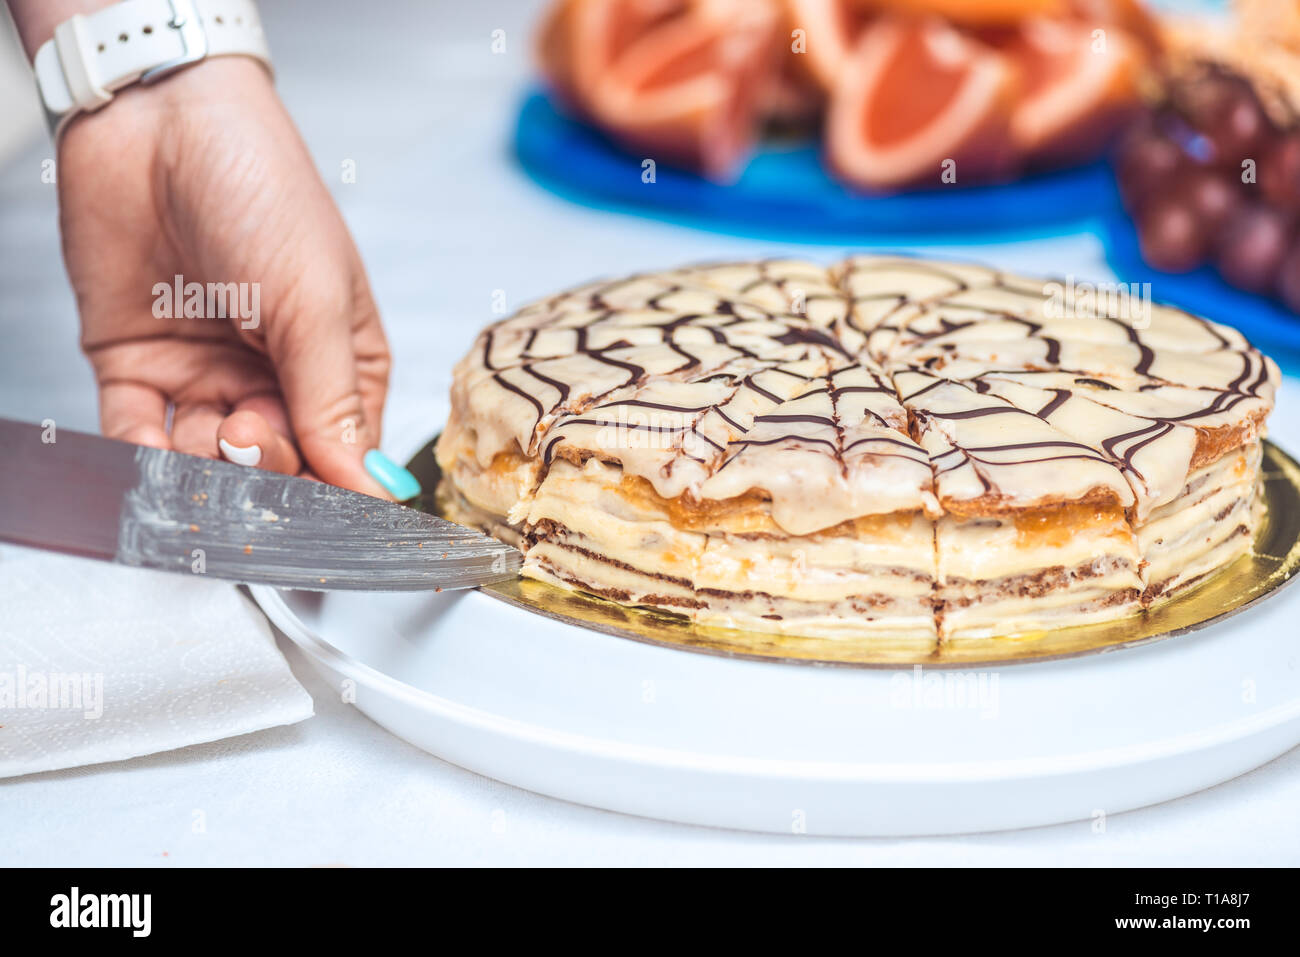 Woman's hands cut whole esterhazy torte cake with knife. Authentic recipe, hungarian and austrian dessert, view from above, close-up Stock Photo